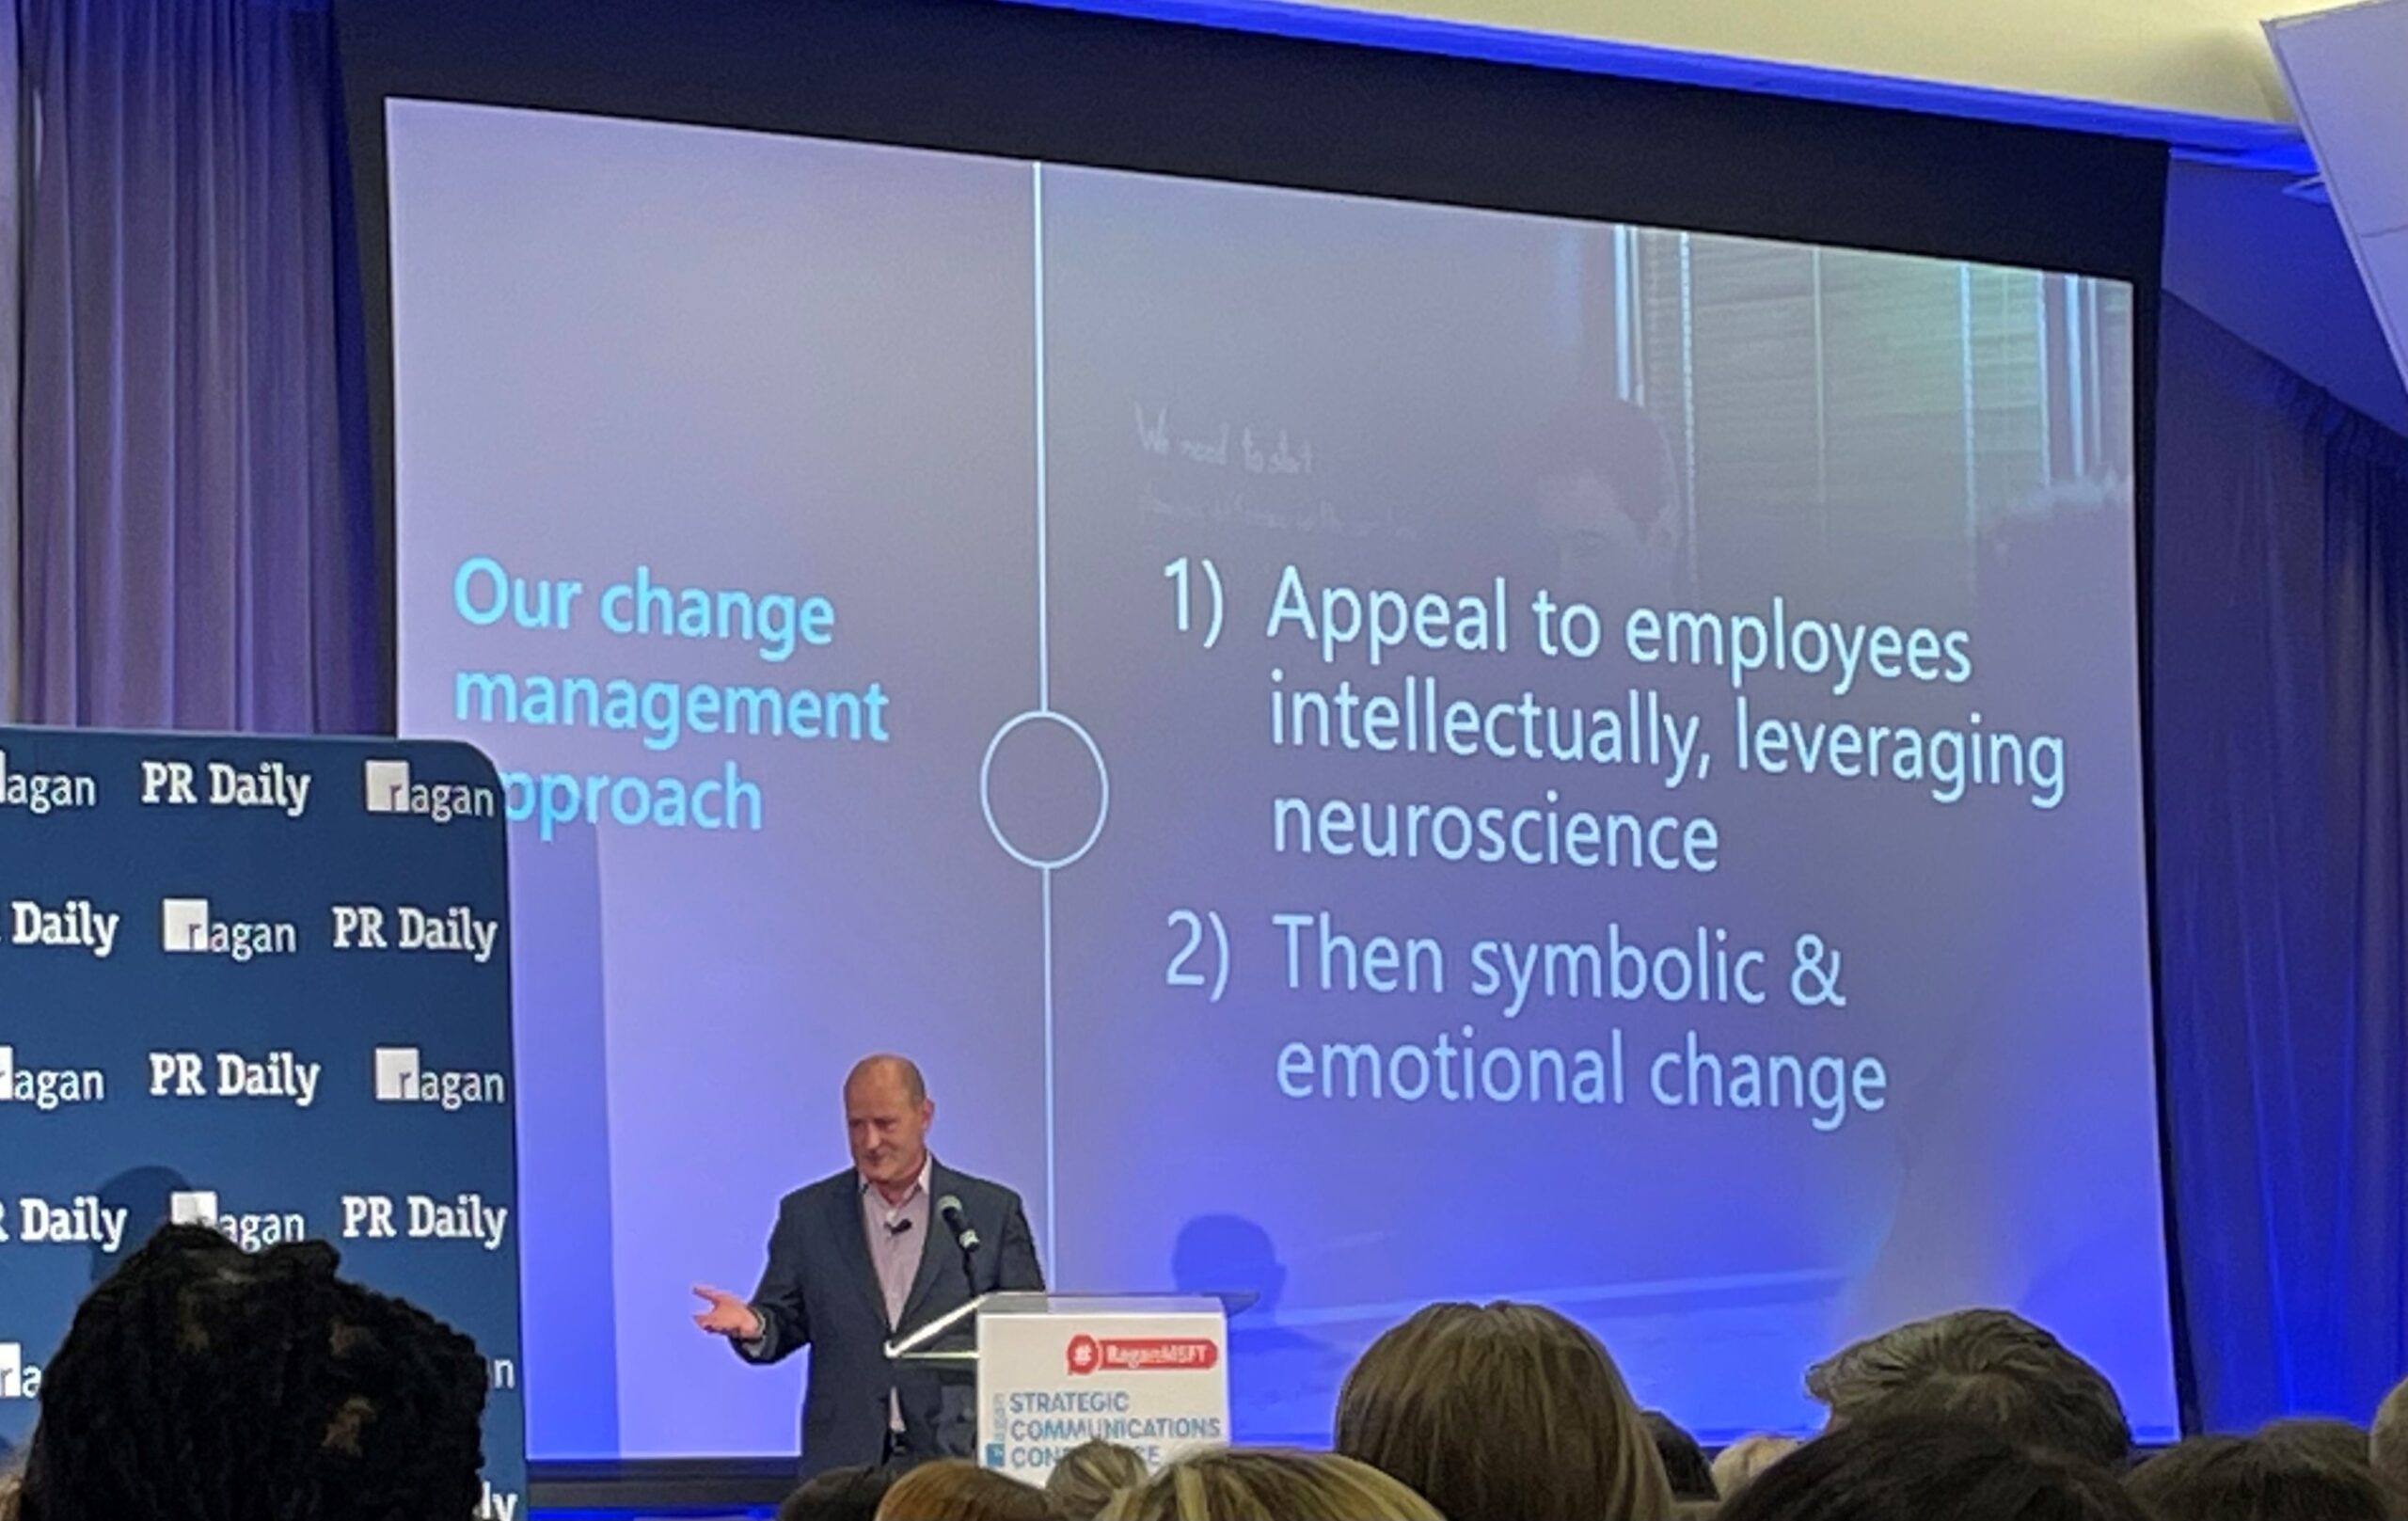 Joe Wittinghill, corporate vice president of talent, learning & insights at Microsoft, took to the stage Wednesday at Ragan and PR Daily’s Strategic Communications Conference